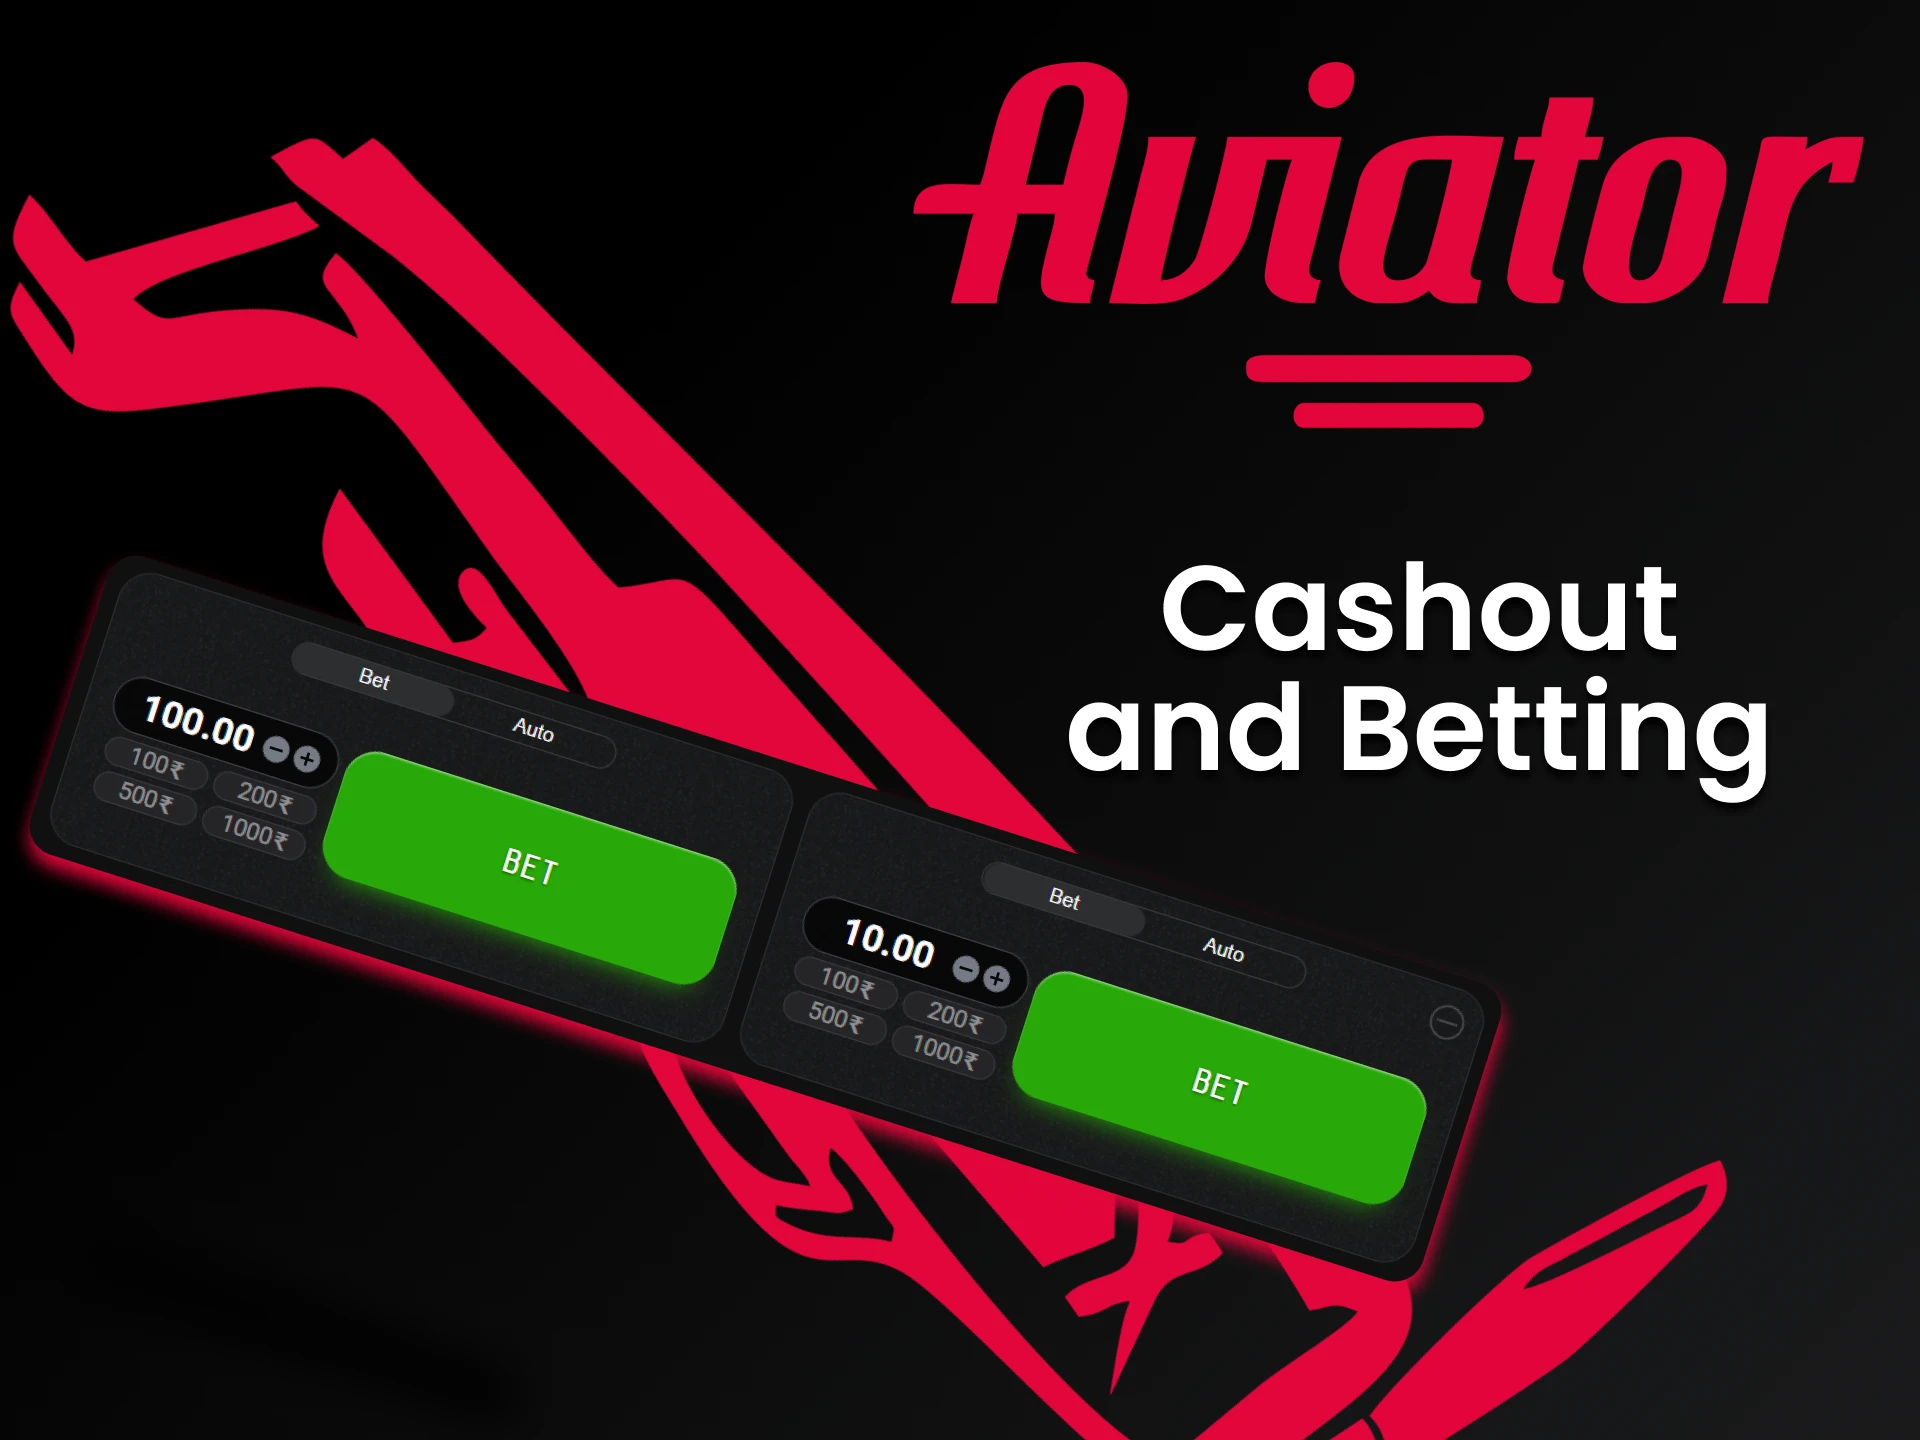 In the Aviator game, you decide how much to bet and how much to withdraw.